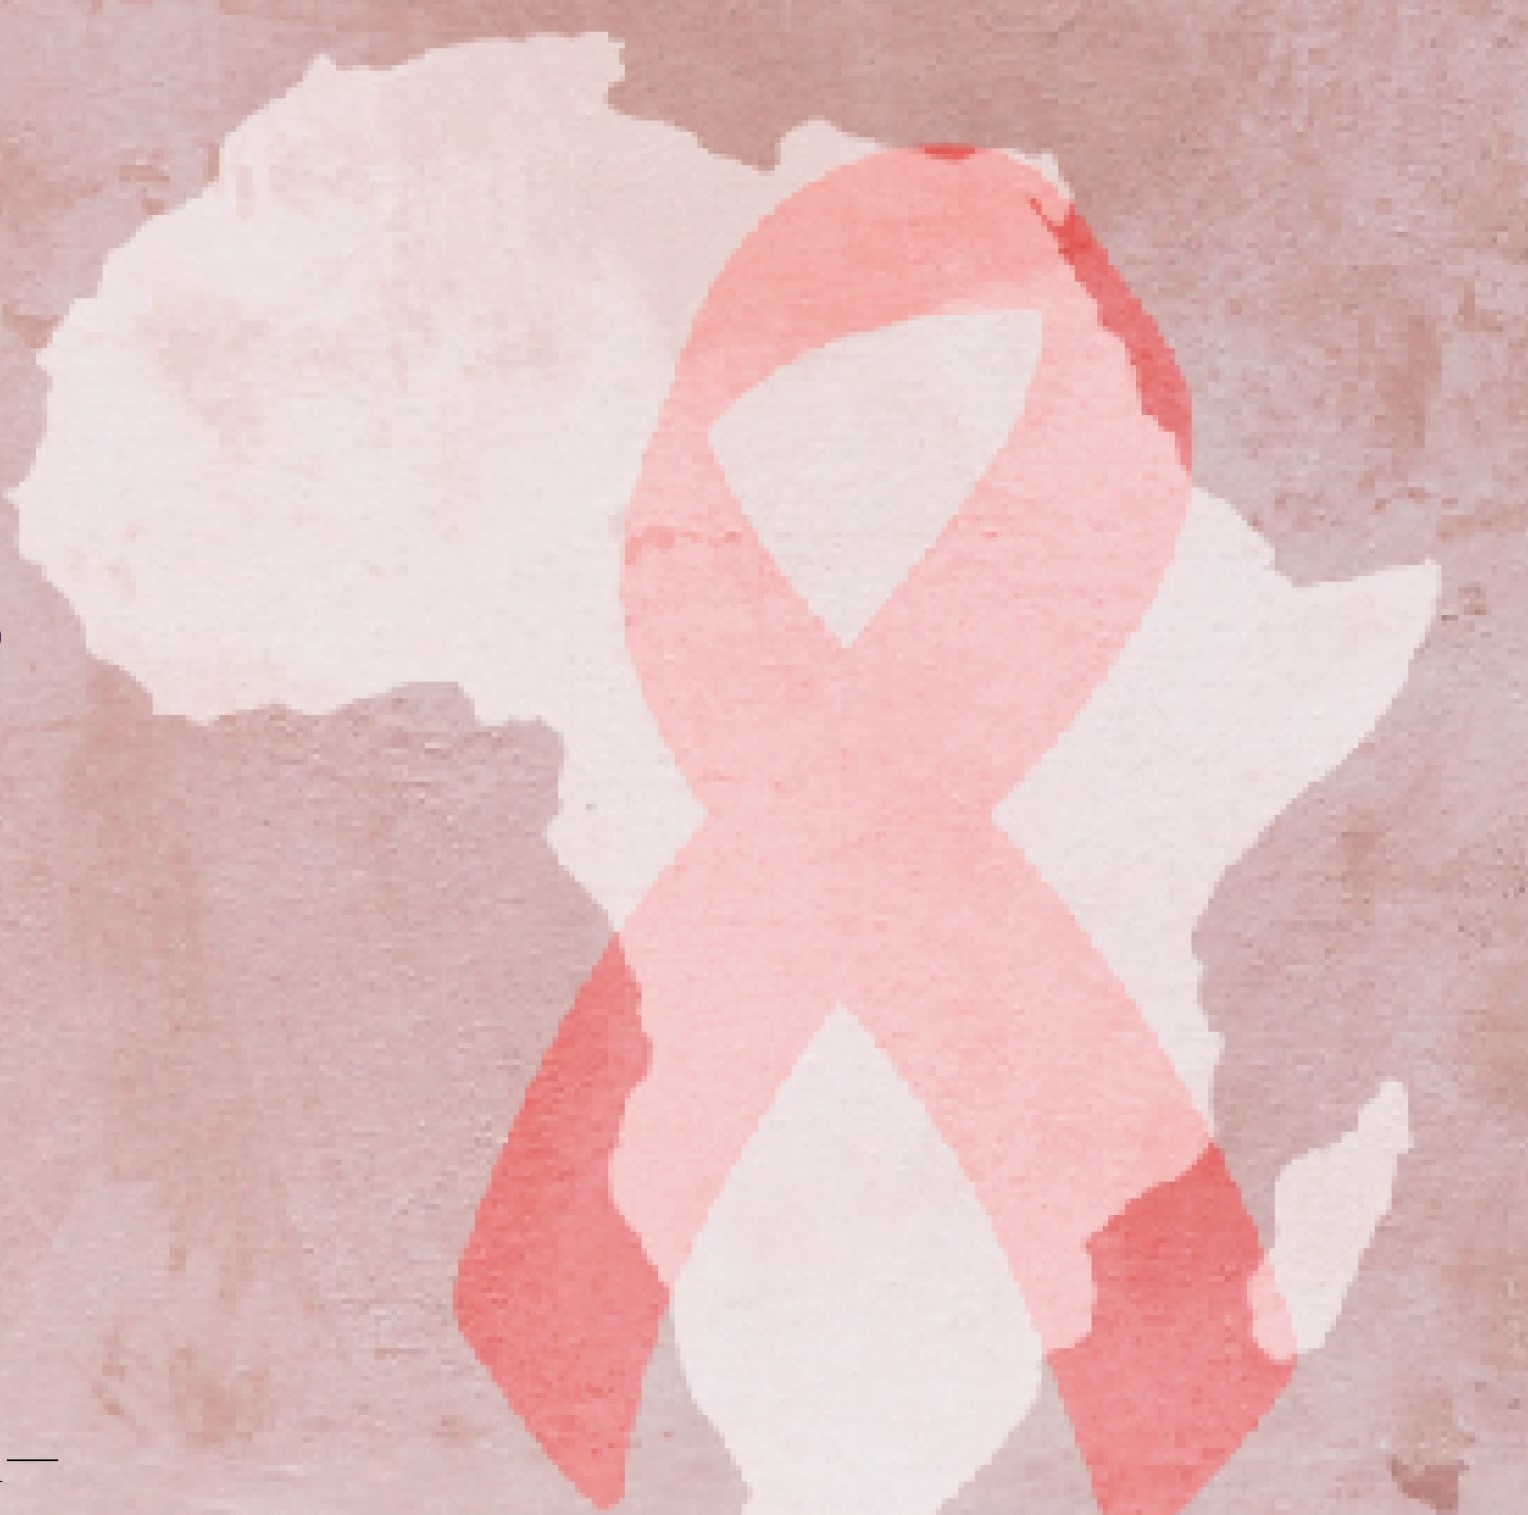 Red AIDS ribbon superimposed on image of Africa